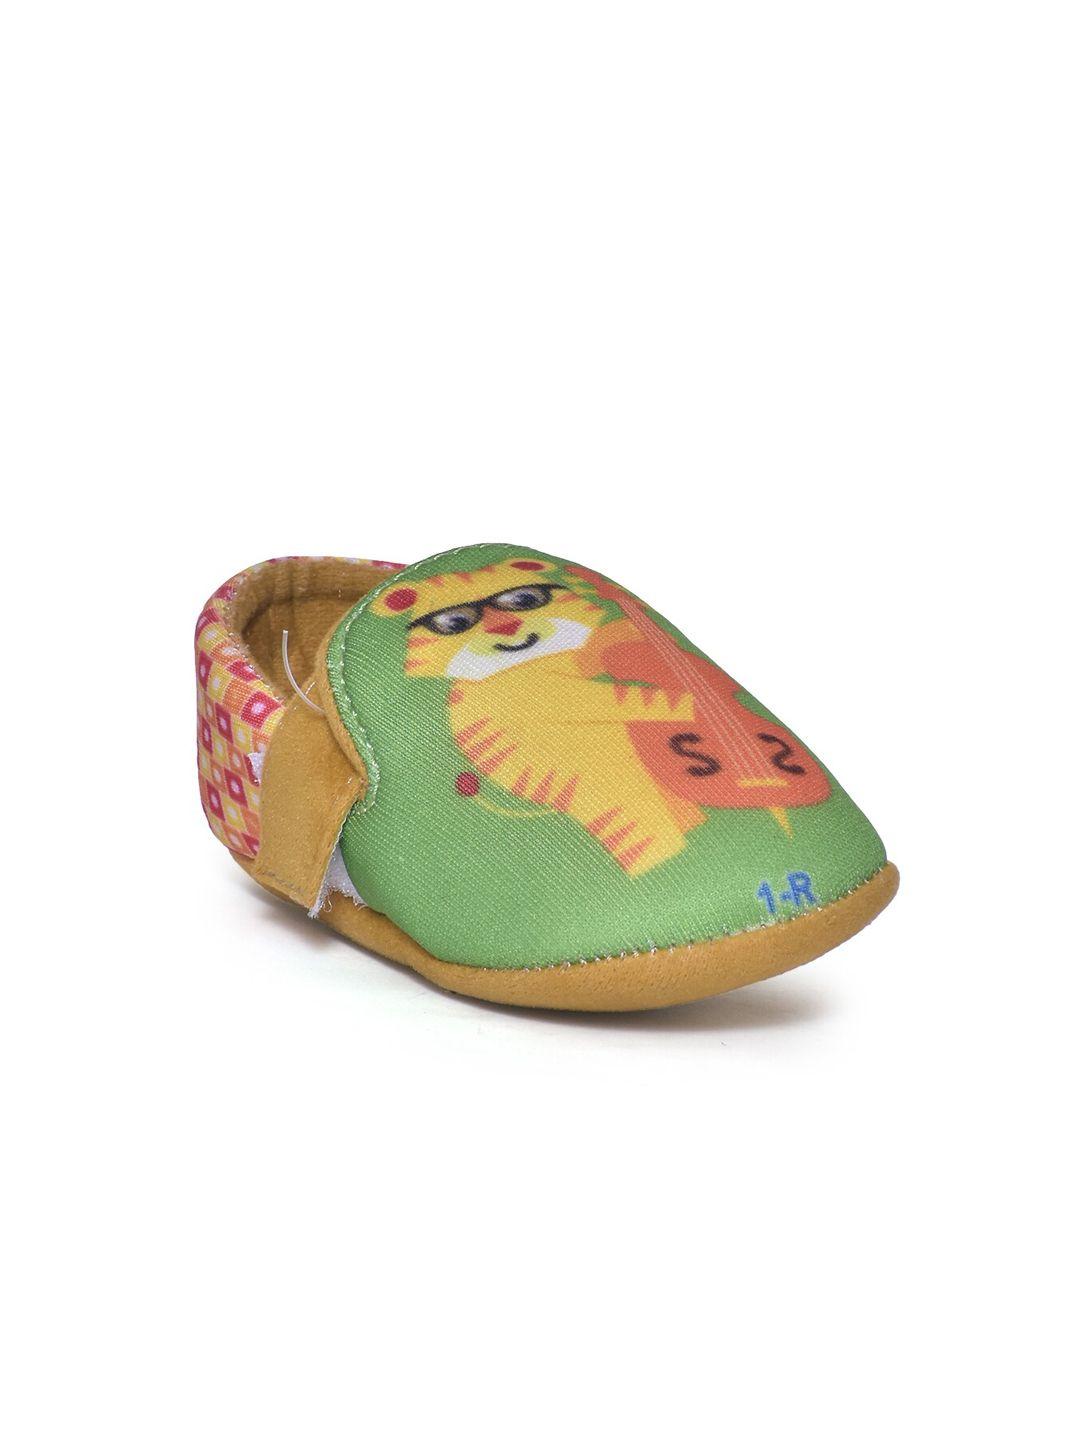 toothless infants green & yellow printed booties